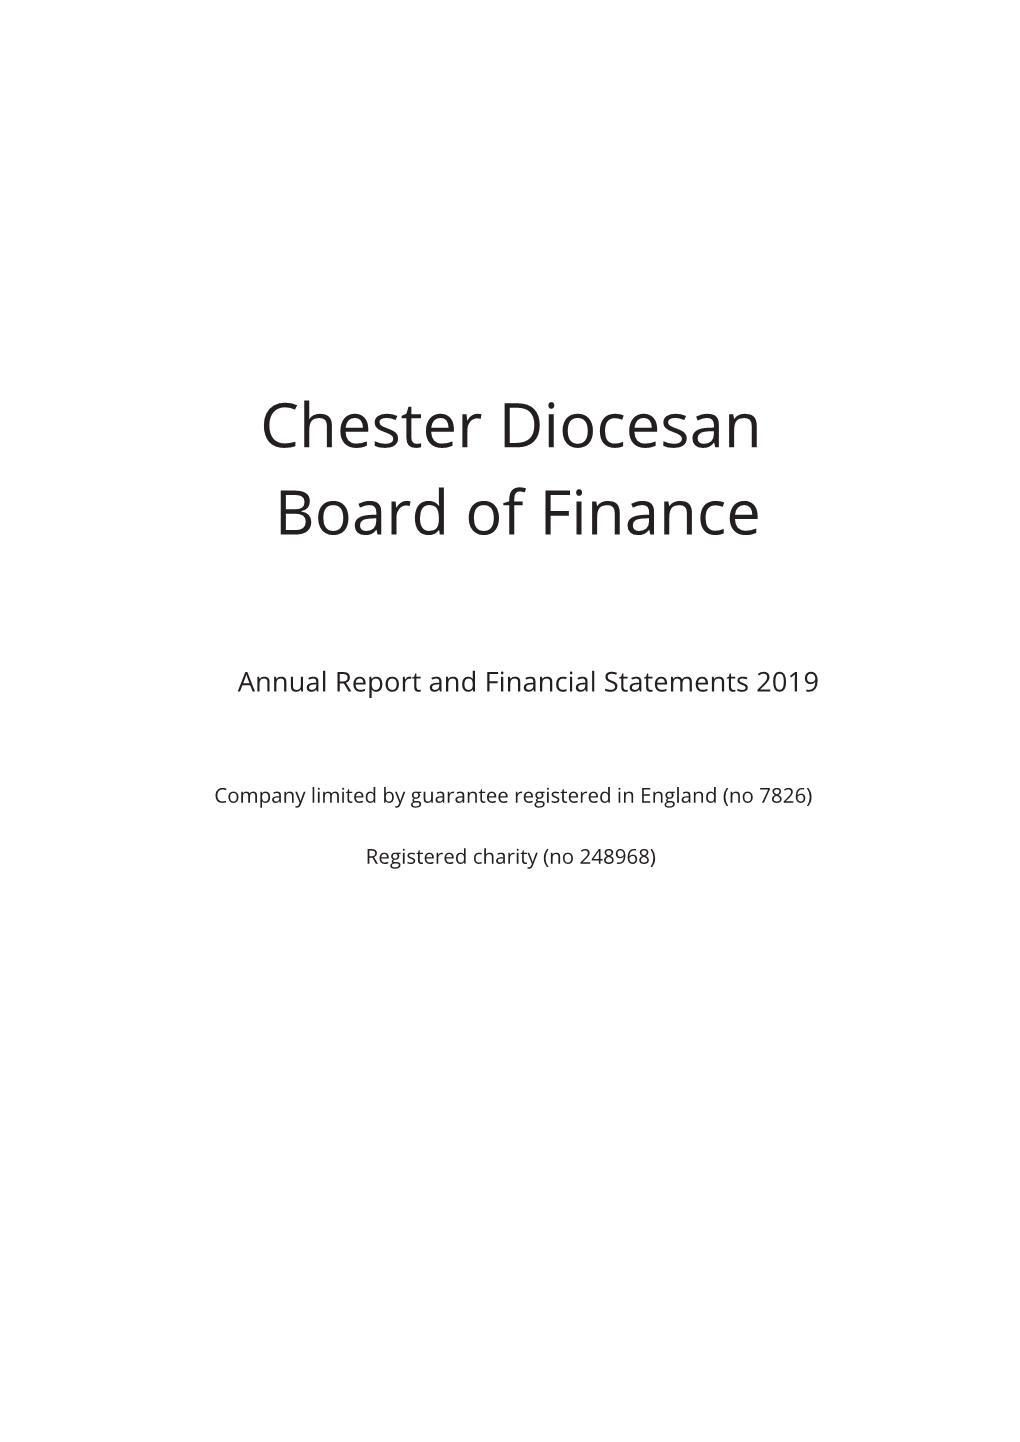 Diocesan Annual Report and Financial Statements 2019